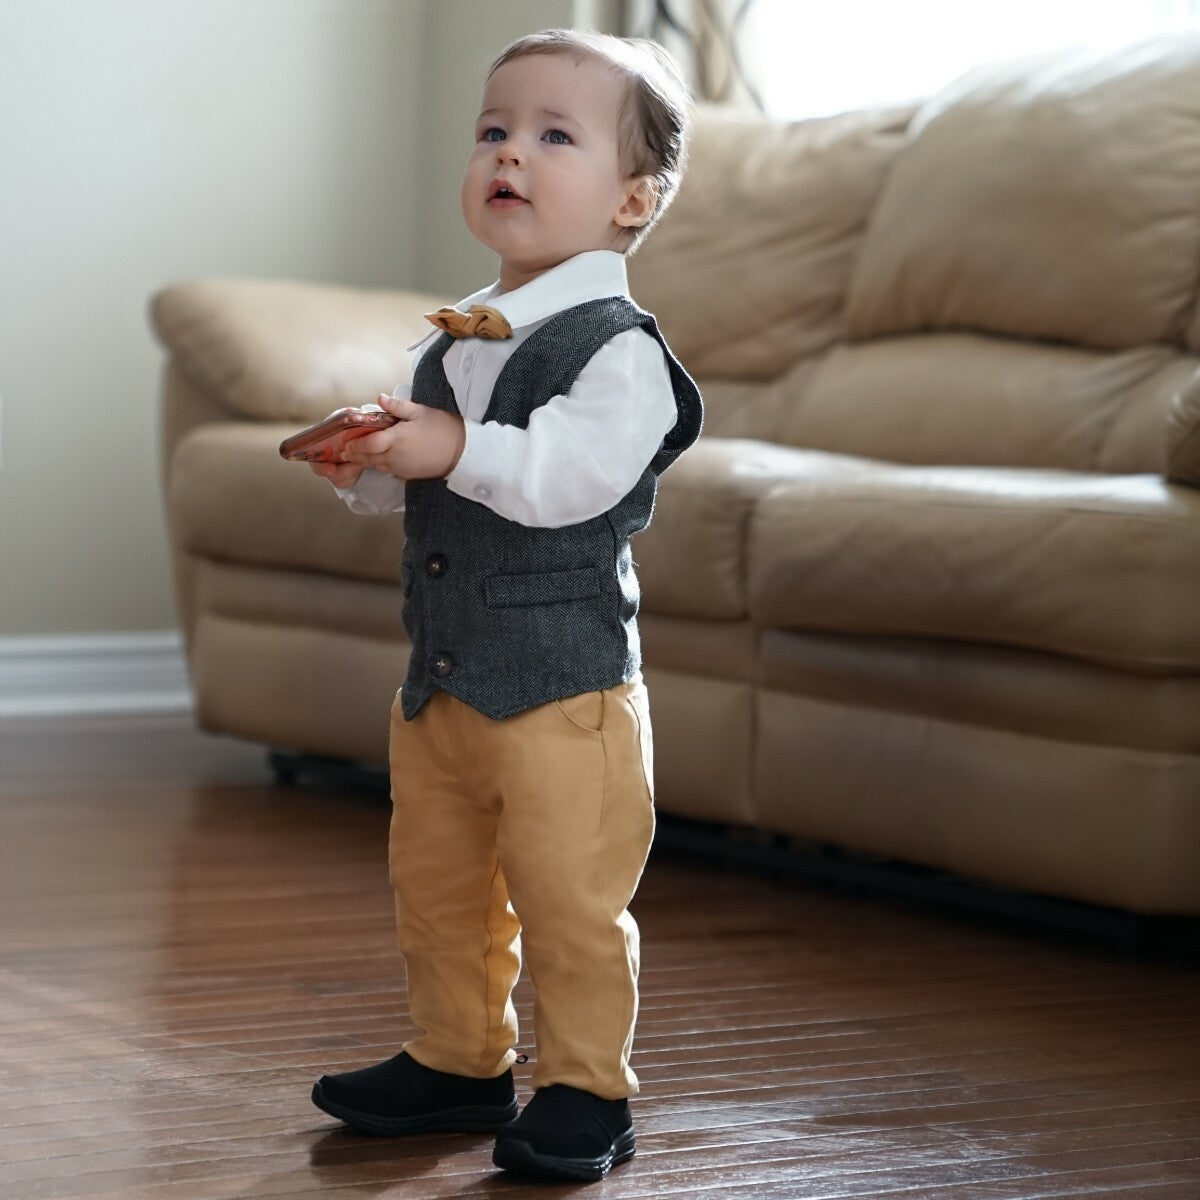 Toddler in brown pants and grey vest